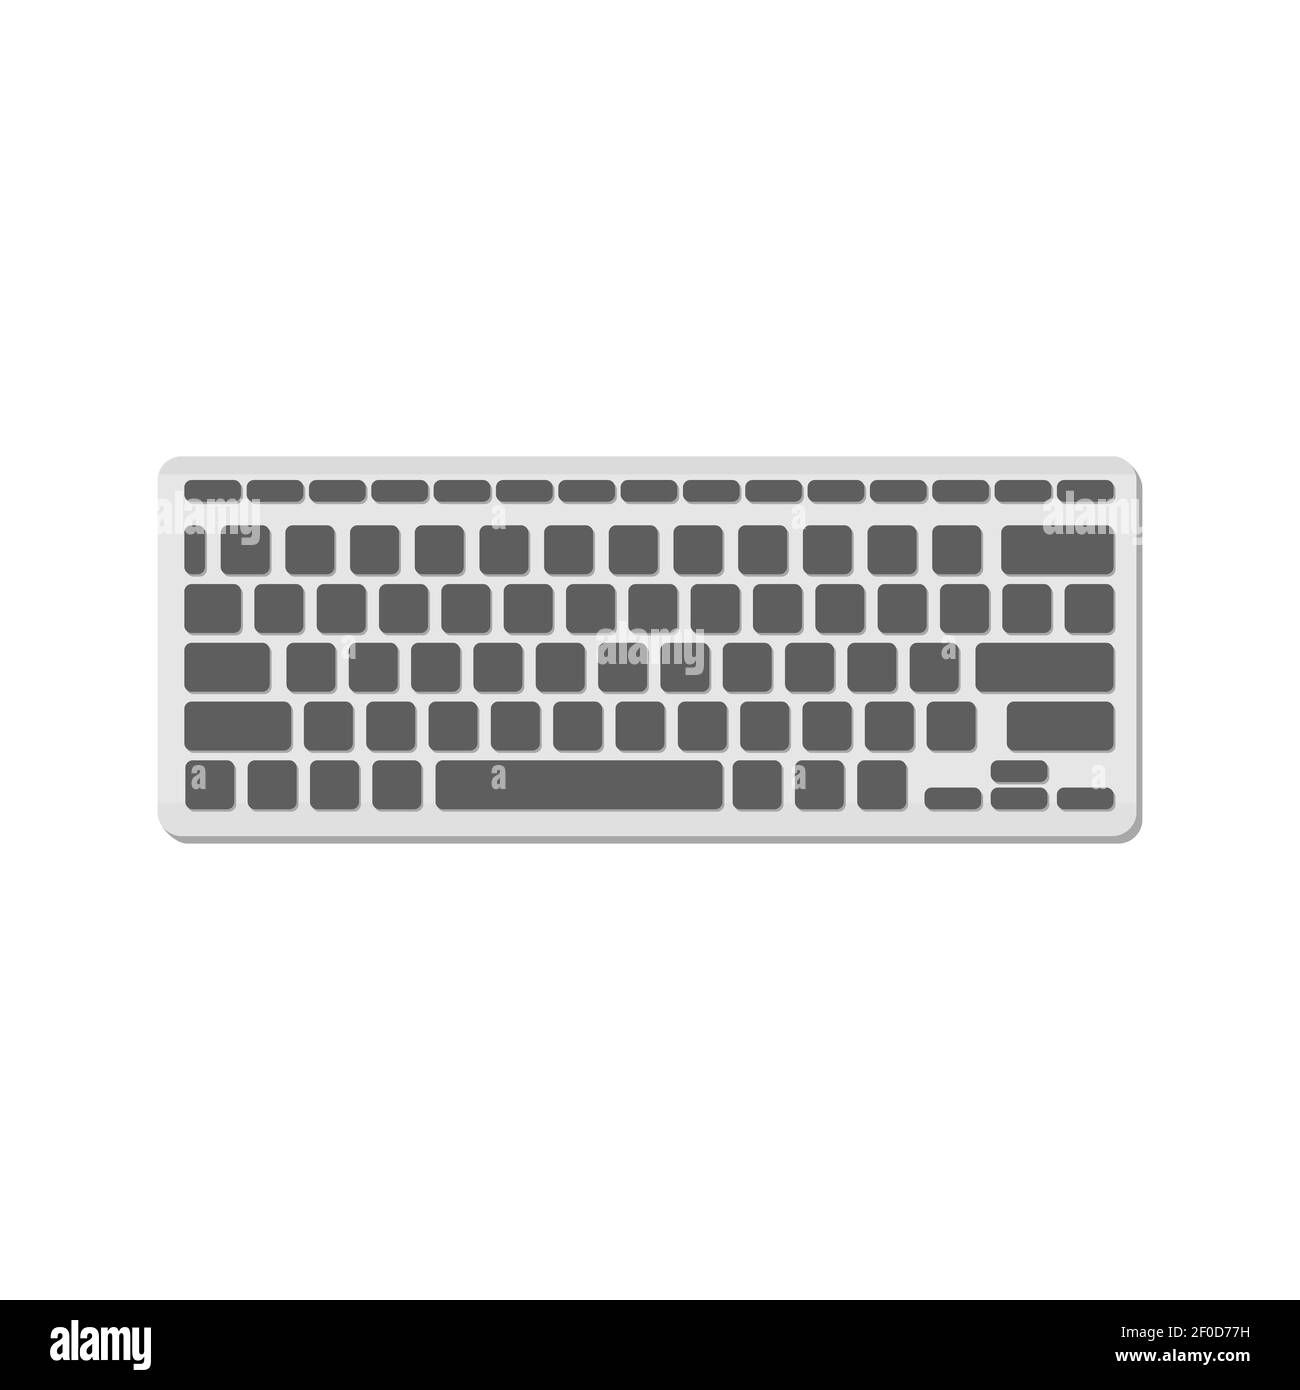 The computer keyboard is light with gray buttons and no symbols. A modern image of a computer keyboard. Flat vector illustration Stock Vector